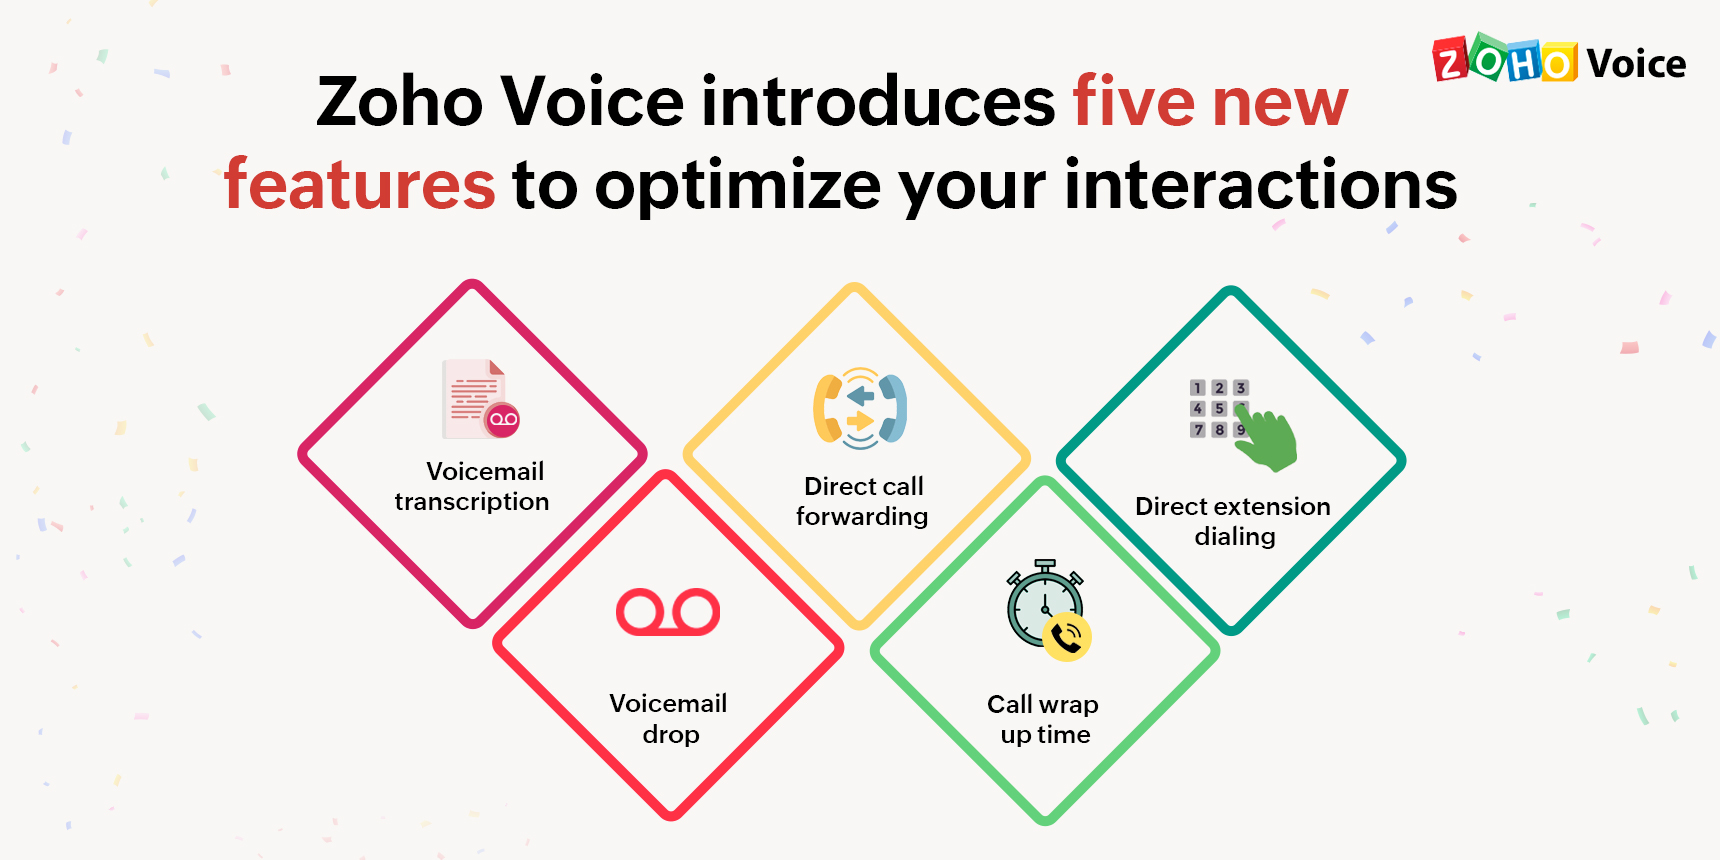 Product updates from Zoho Voice: What's new in June?